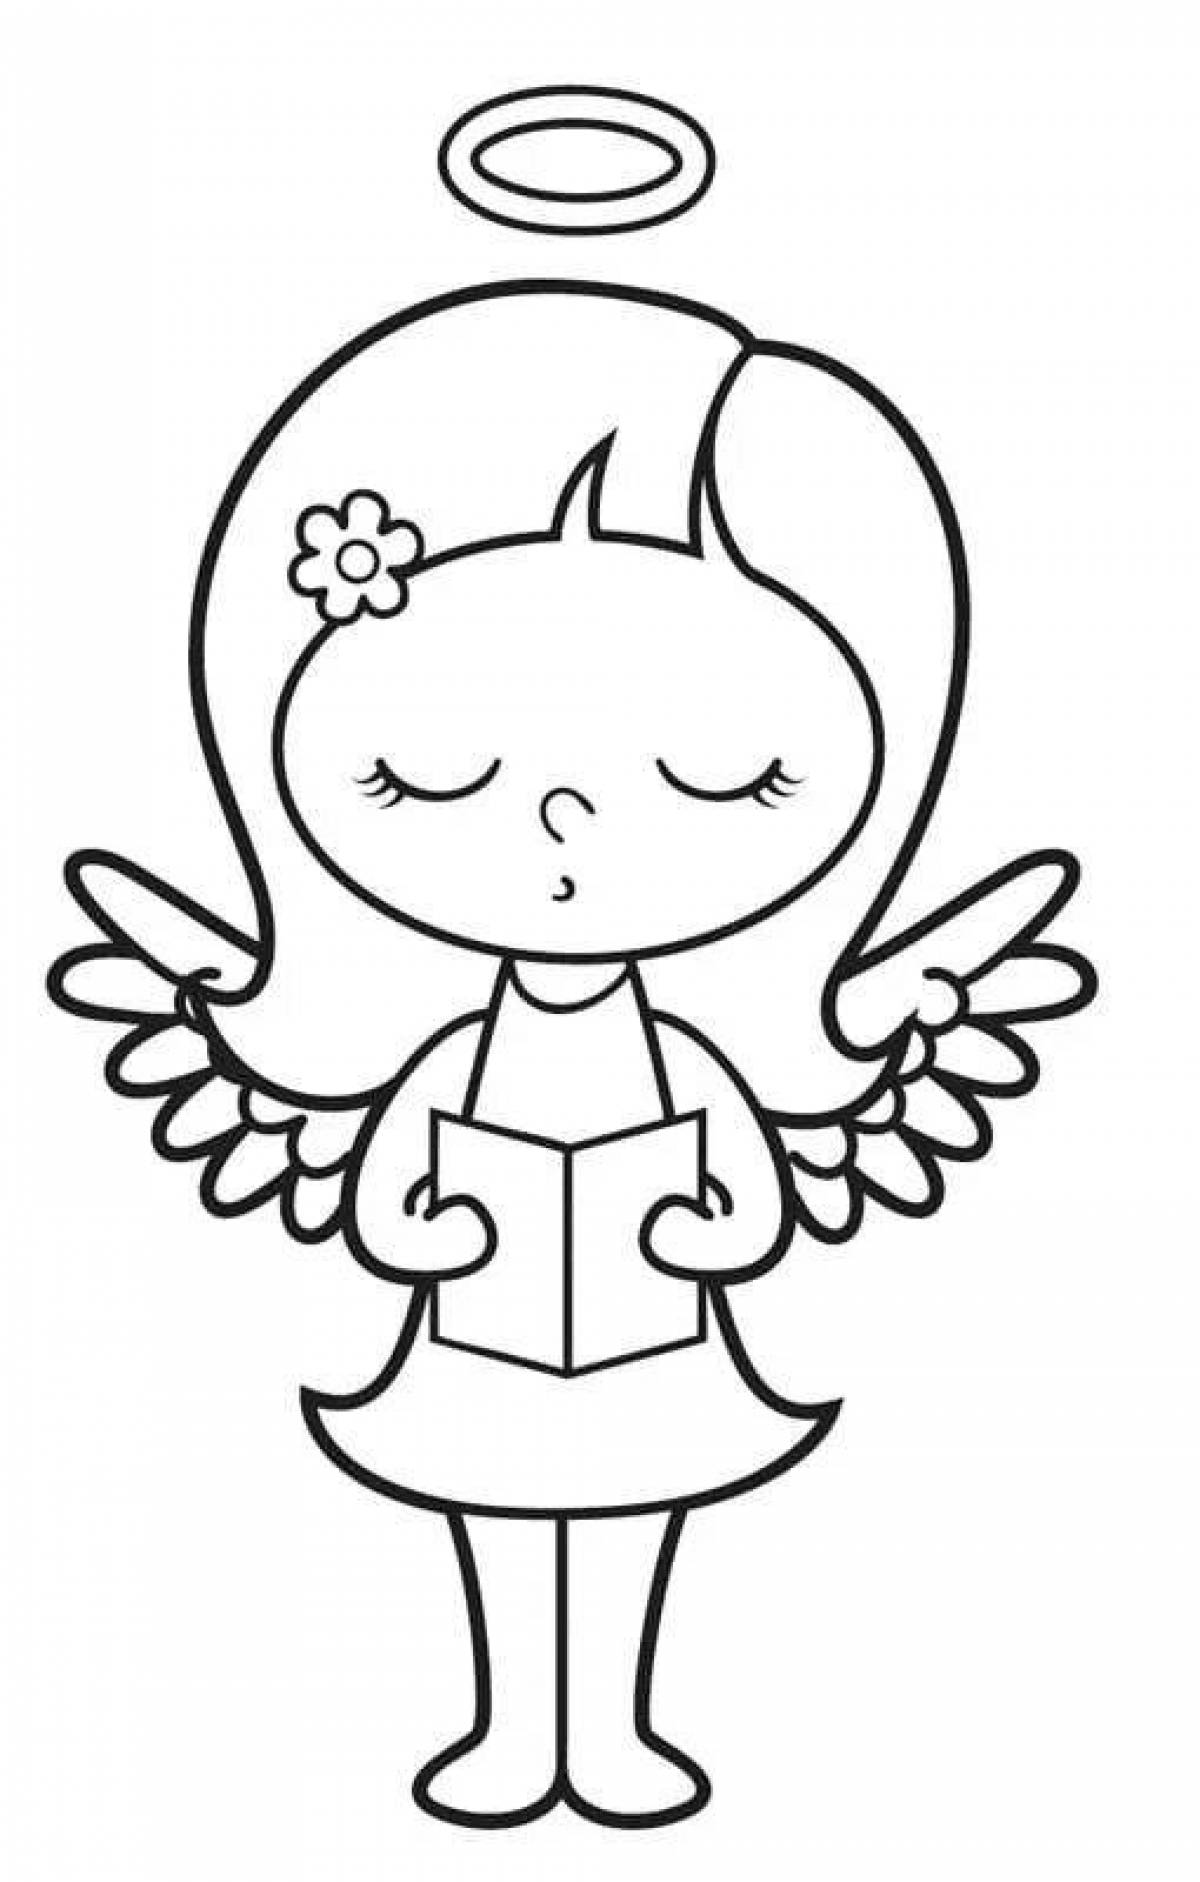 Shining angel coloring book